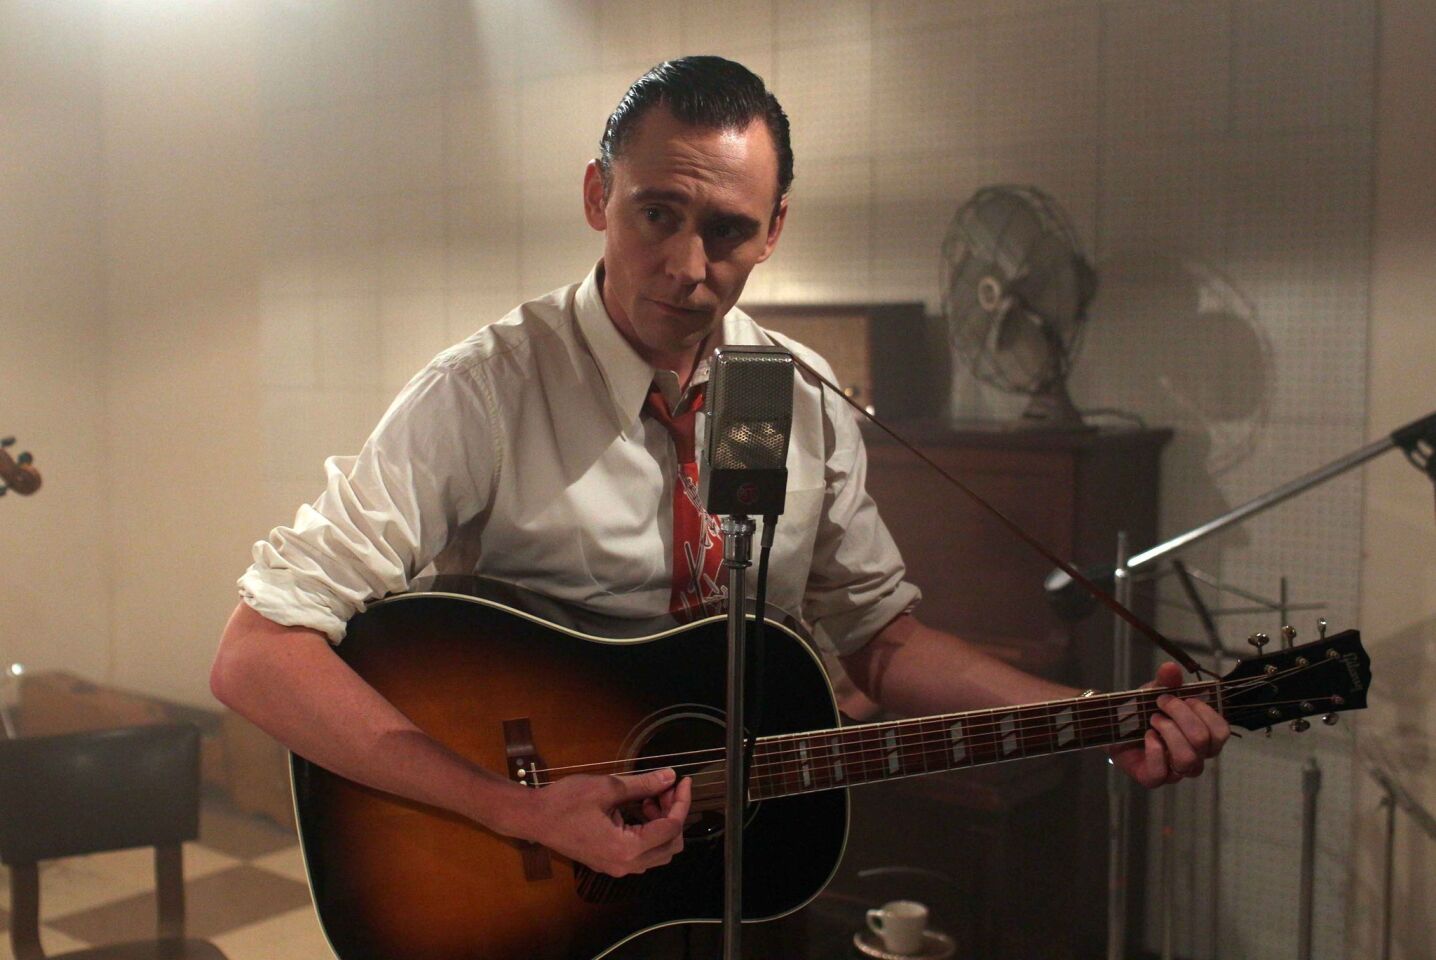 In "I Saw the Light," Tom Hiddleston, best known for his role as Loki in the Marvel Cinematic Universe, portrays country music pioneer Hank Williams, who died at age 29.